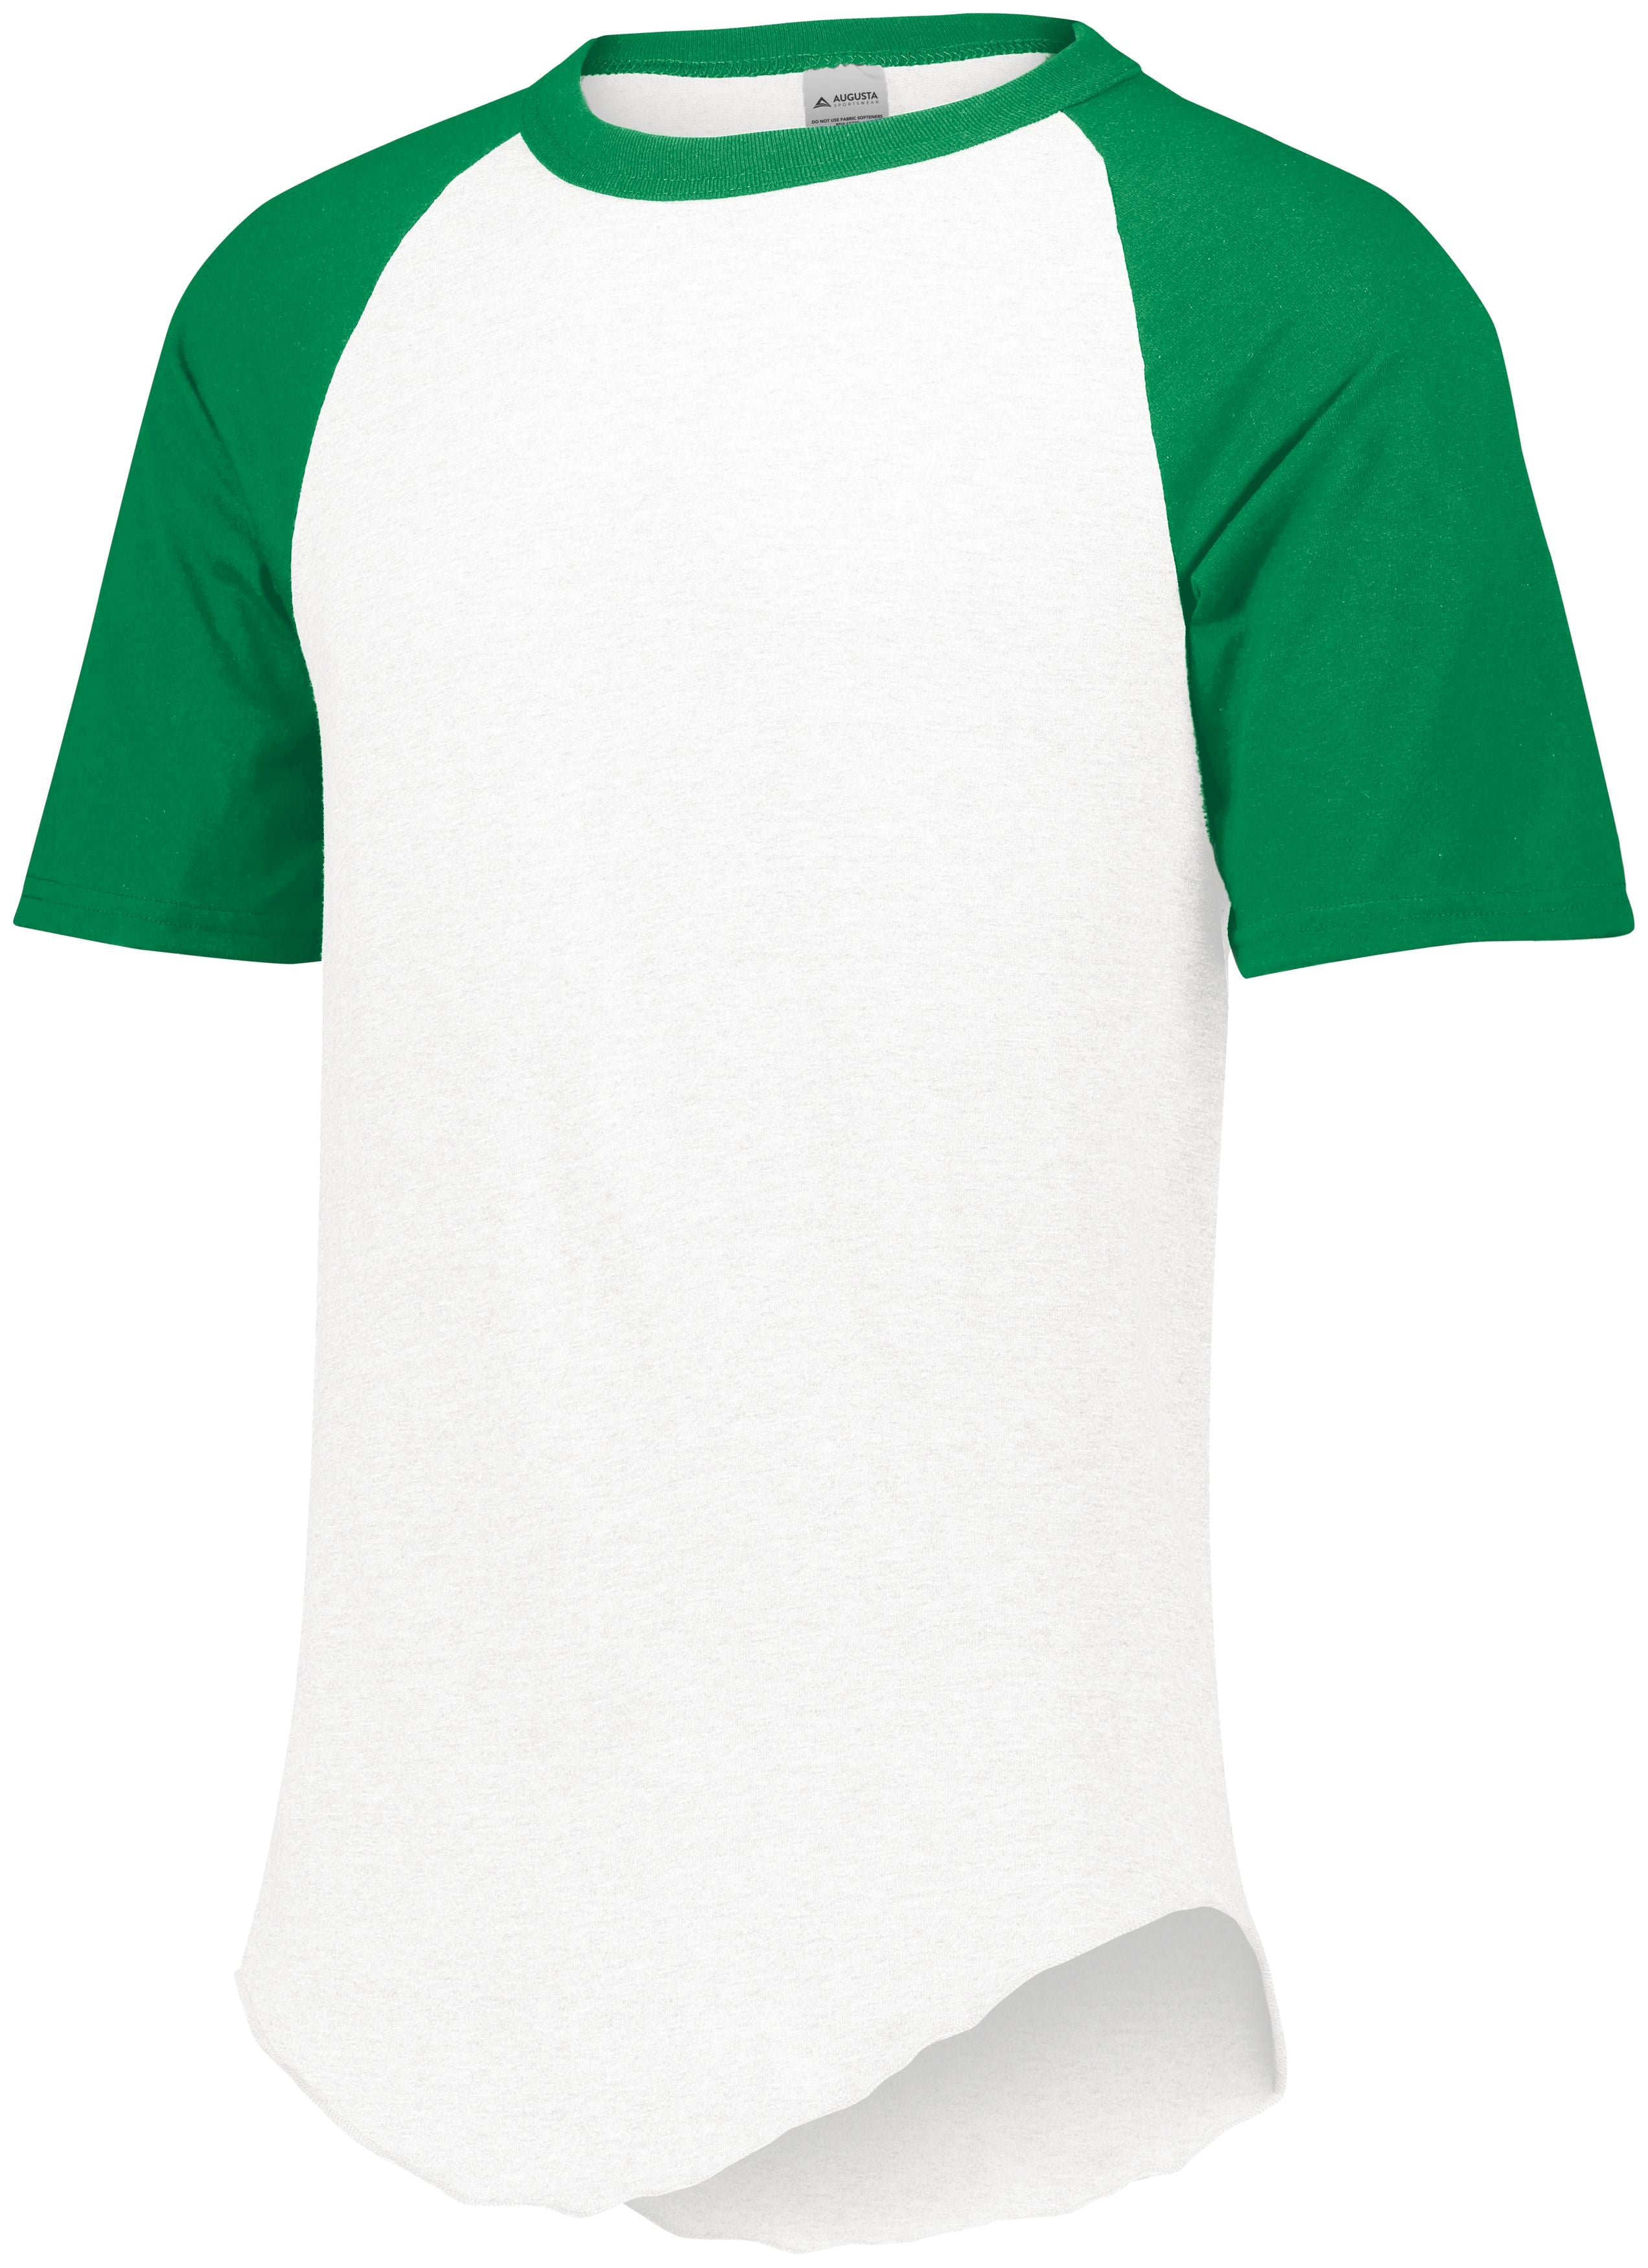 Augusta Sportswear Short Sleeve Baseball Jersey in White/Kelly  -Part of the Adult, Adult-Jersey, Augusta-Products, Baseball, Shirts, All-Sports, All-Sports-1 product lines at KanaleyCreations.com